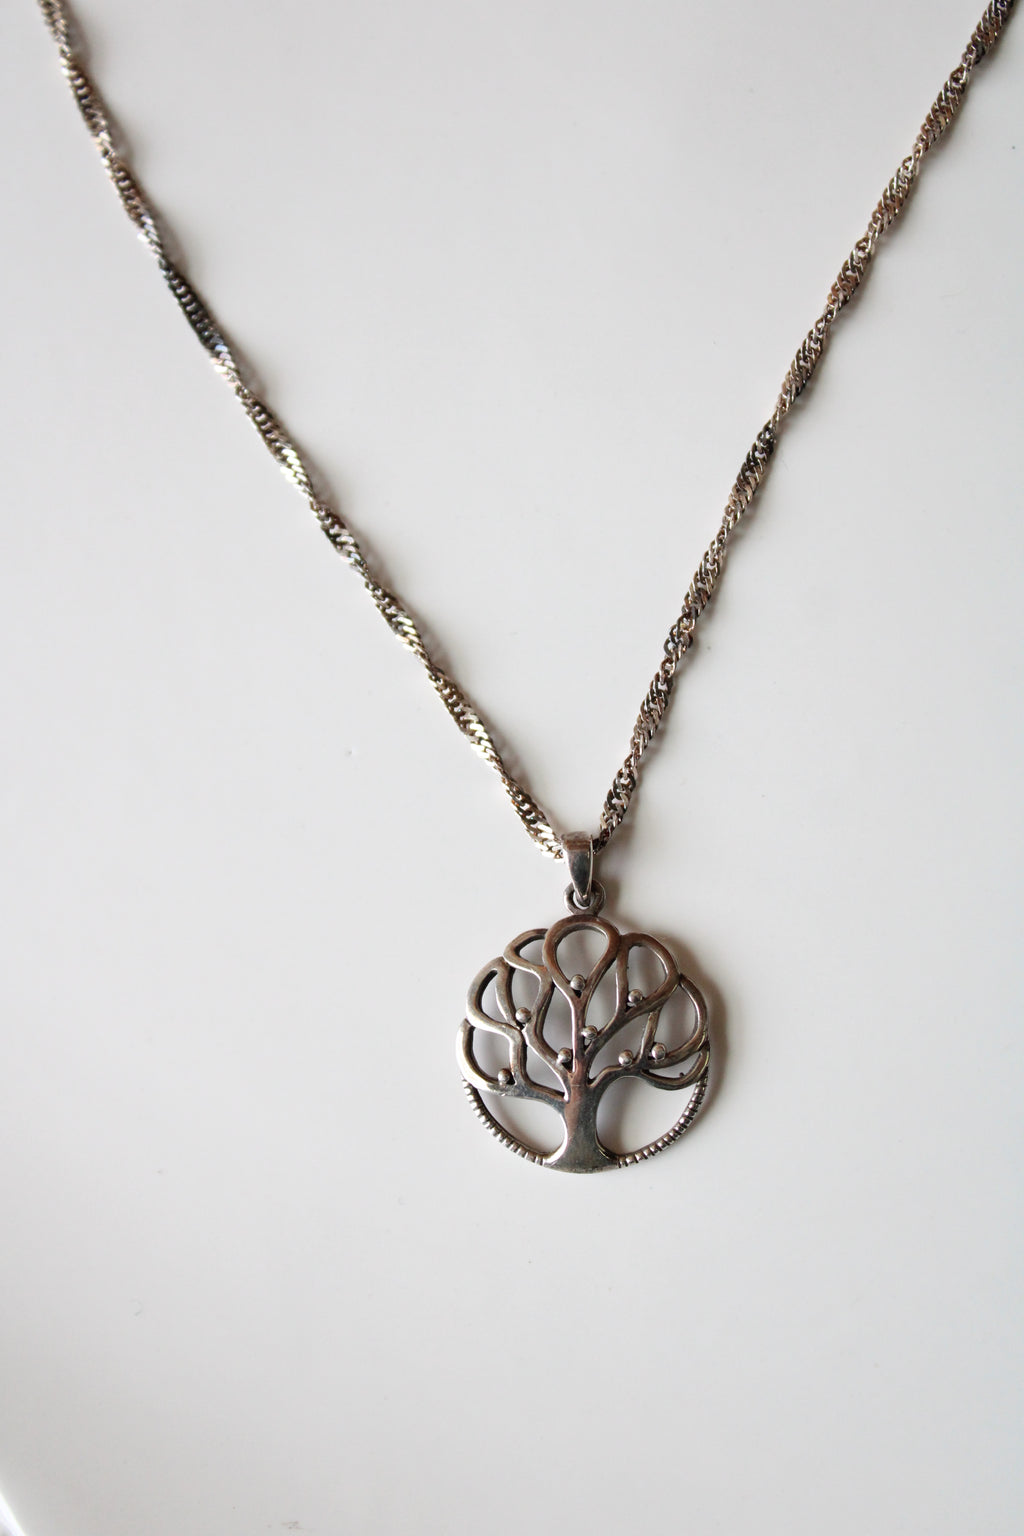 Tree Pendant Sterling Silver Twist Chain Necklace